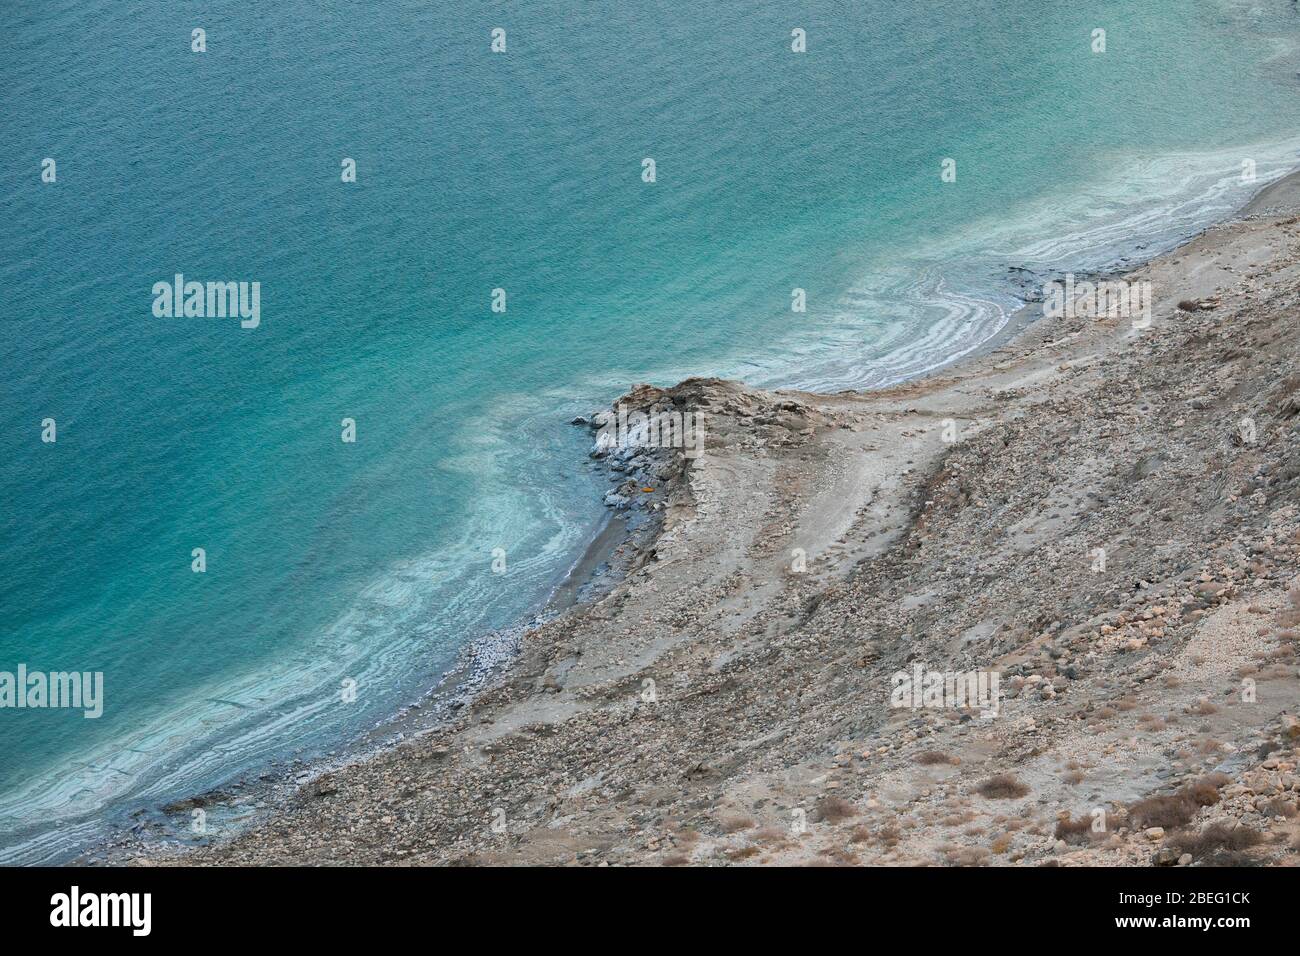 landscape of the Dead Sea, failures of the soil, illustrating an environmental catastrophe on the Dead Sea, Israel. Stock Photo